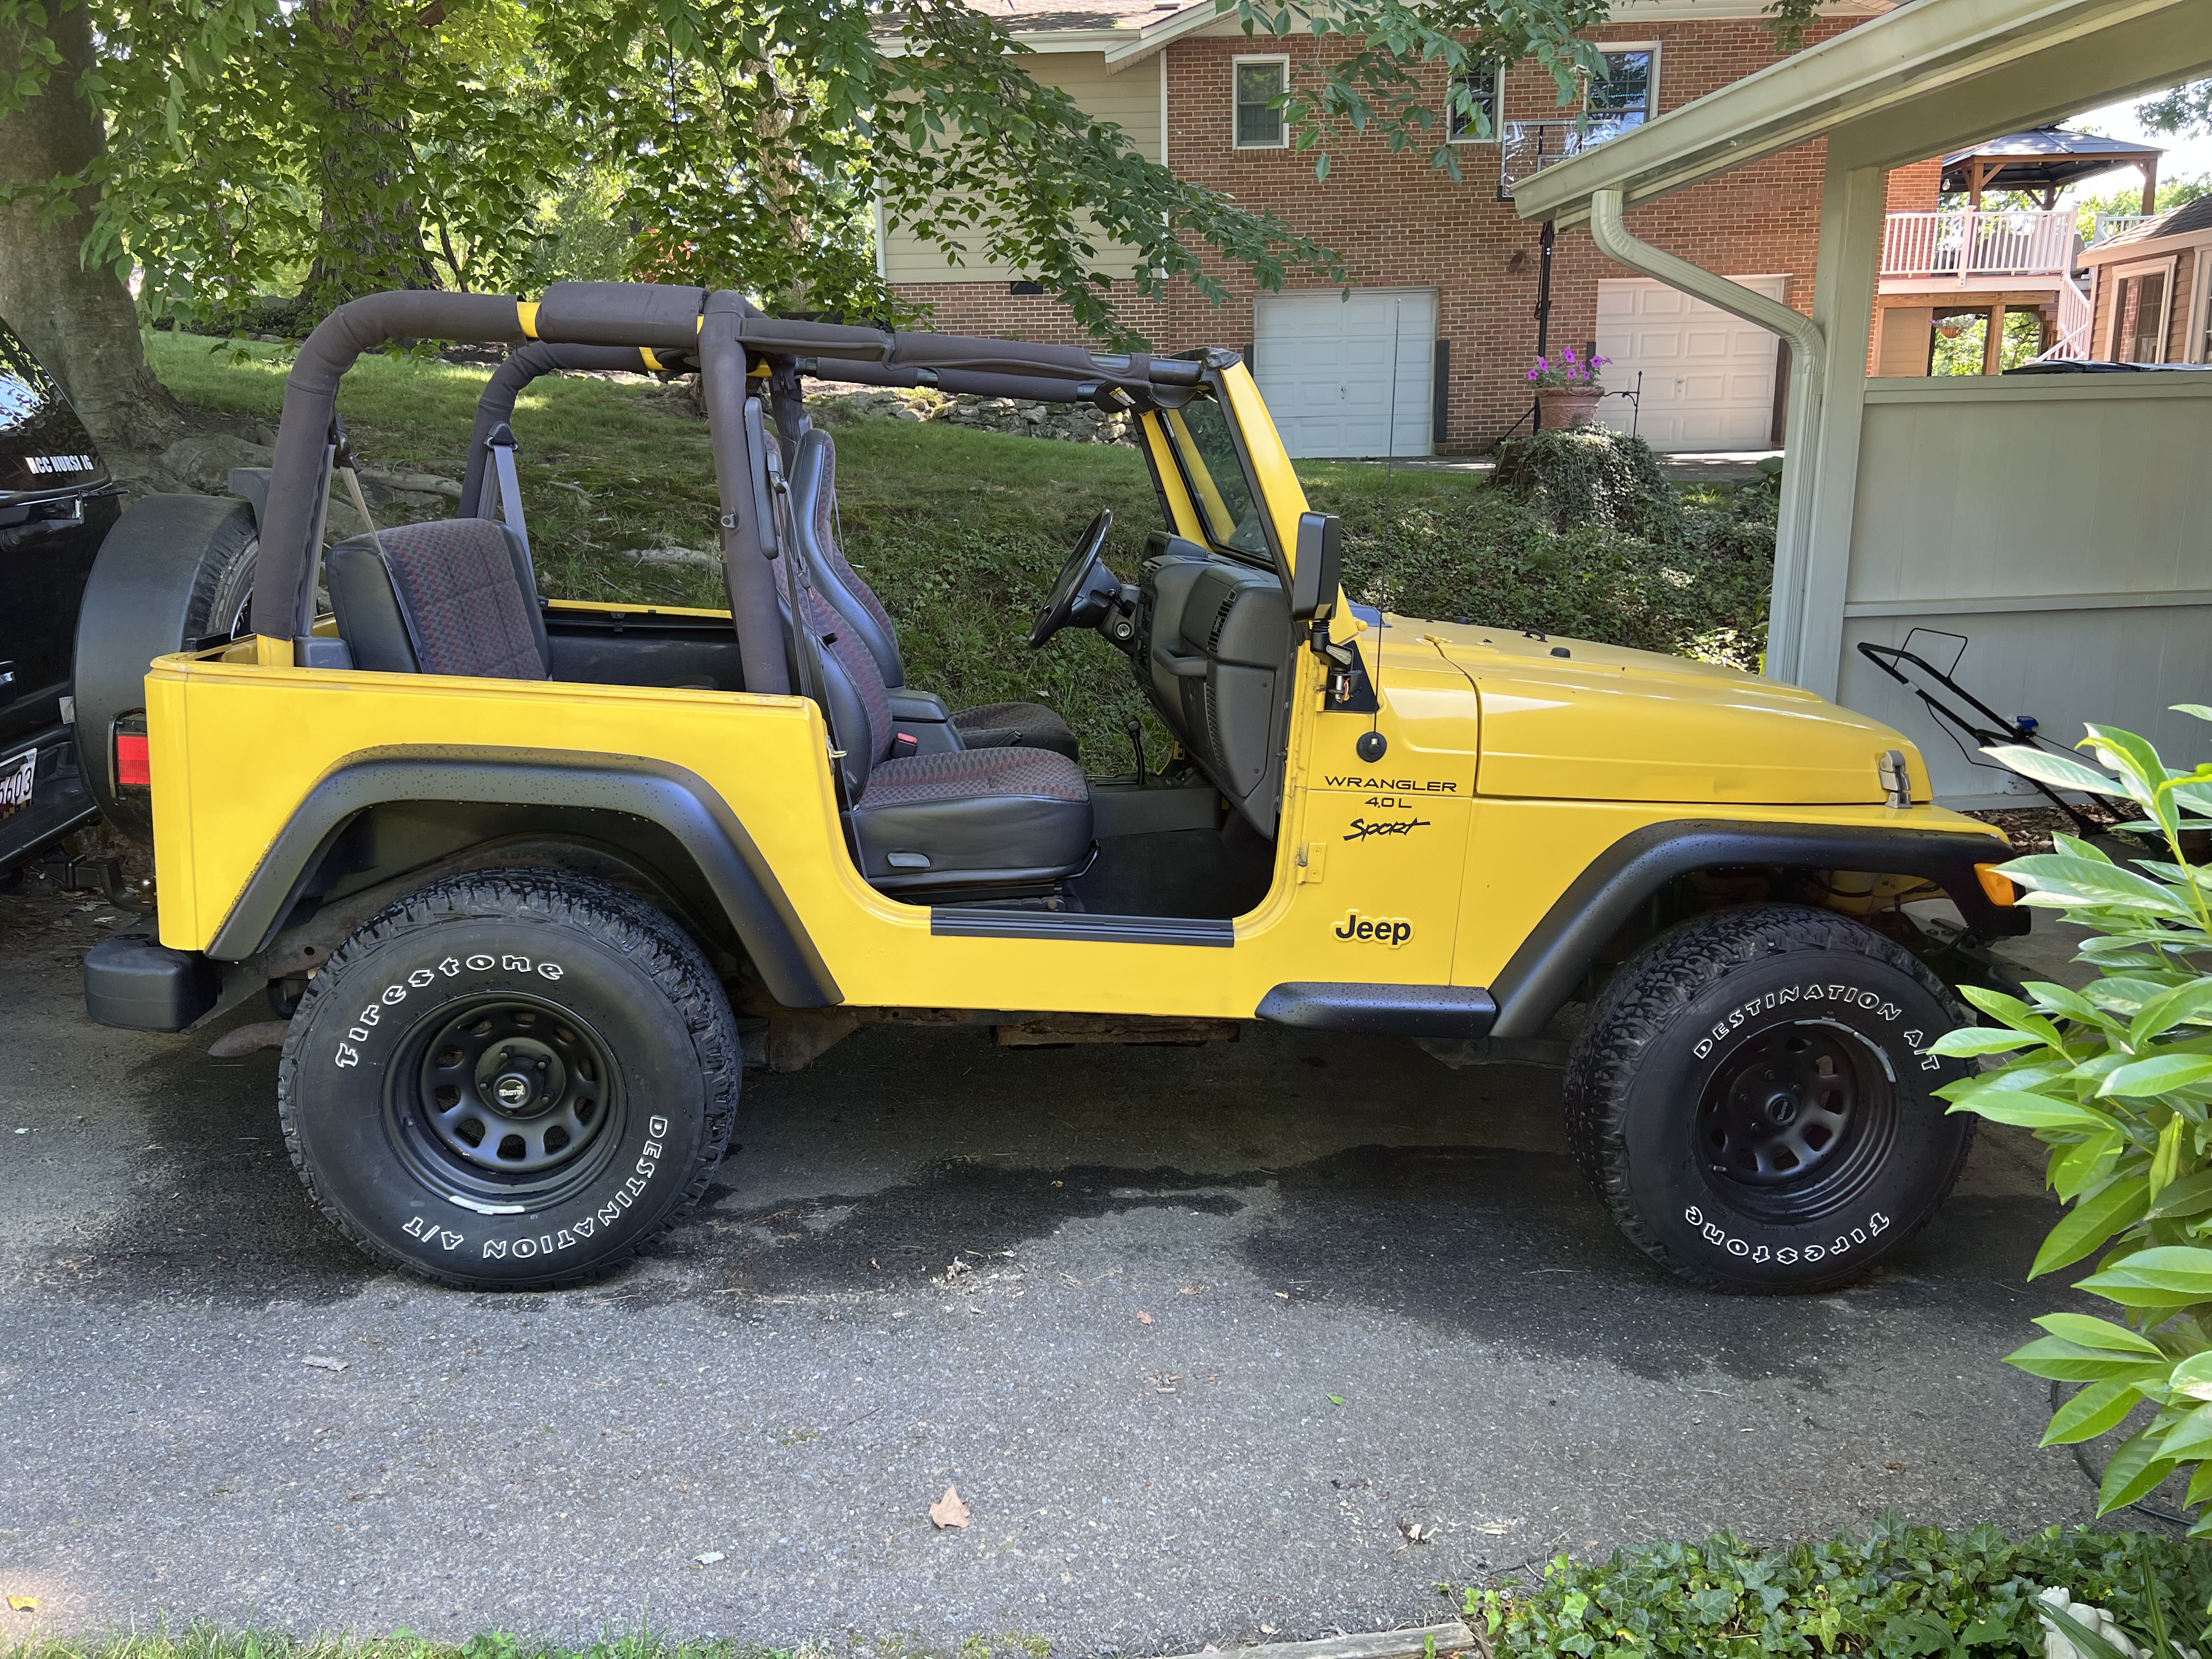 Used Jeep Wrangler for Sale in White Marsh, MD 